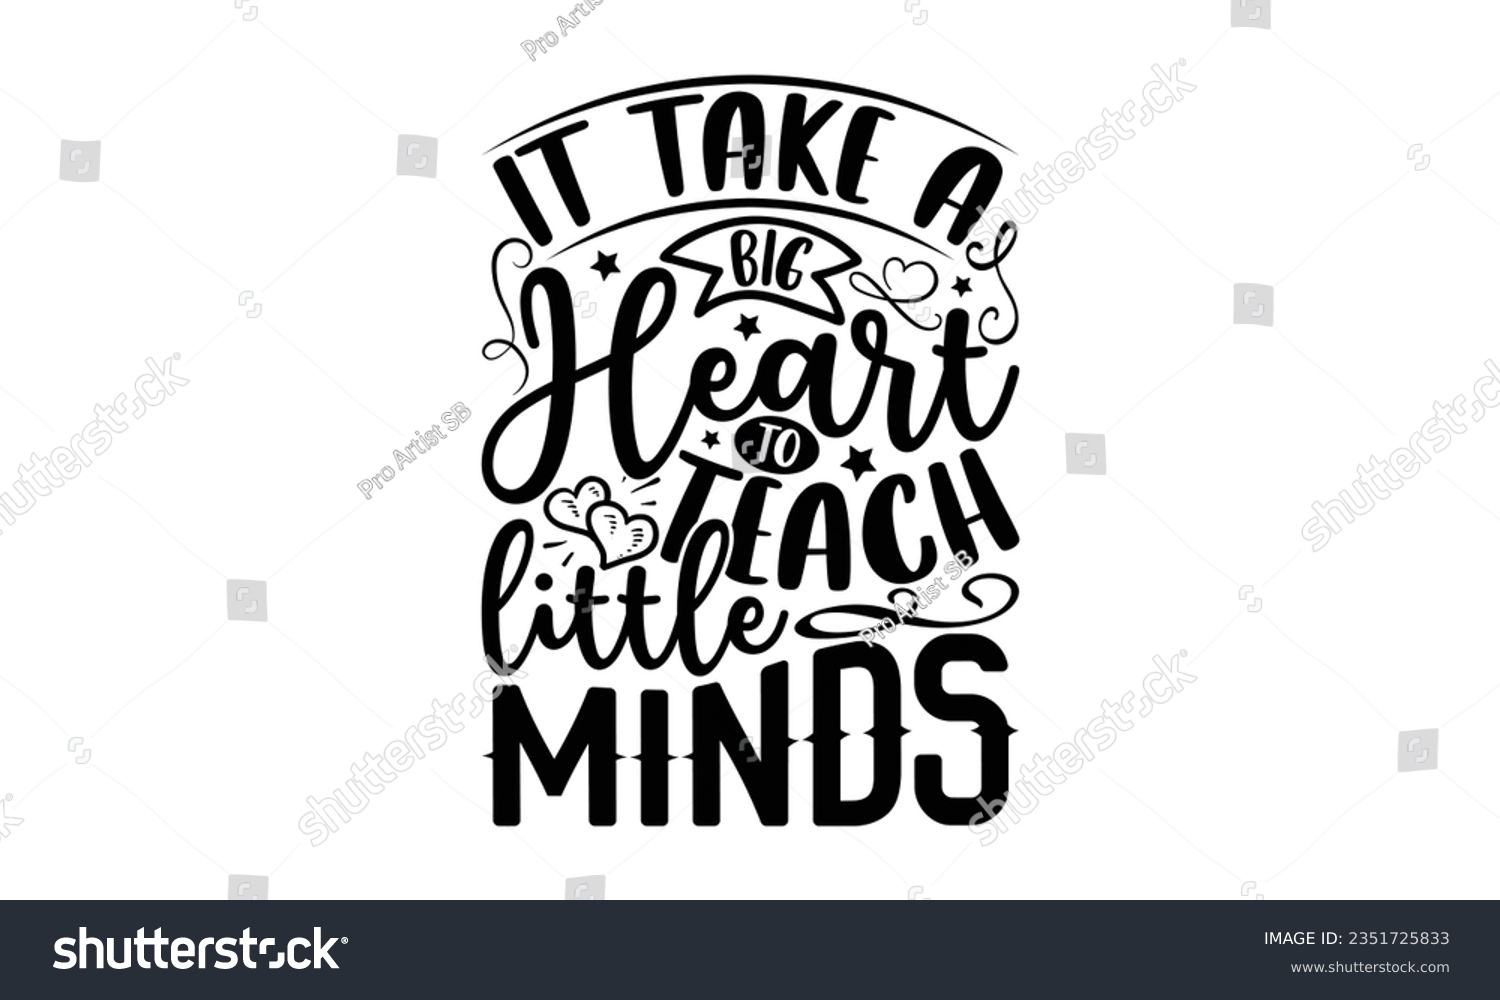 SVG of it take a big heart to teach little minds - Teacher SVG Design, Teacher Lettering Design, Vector EPS Editable Files, Isolated On White Background, Prints on T-Shirts and Bags, Posters, Cards. svg